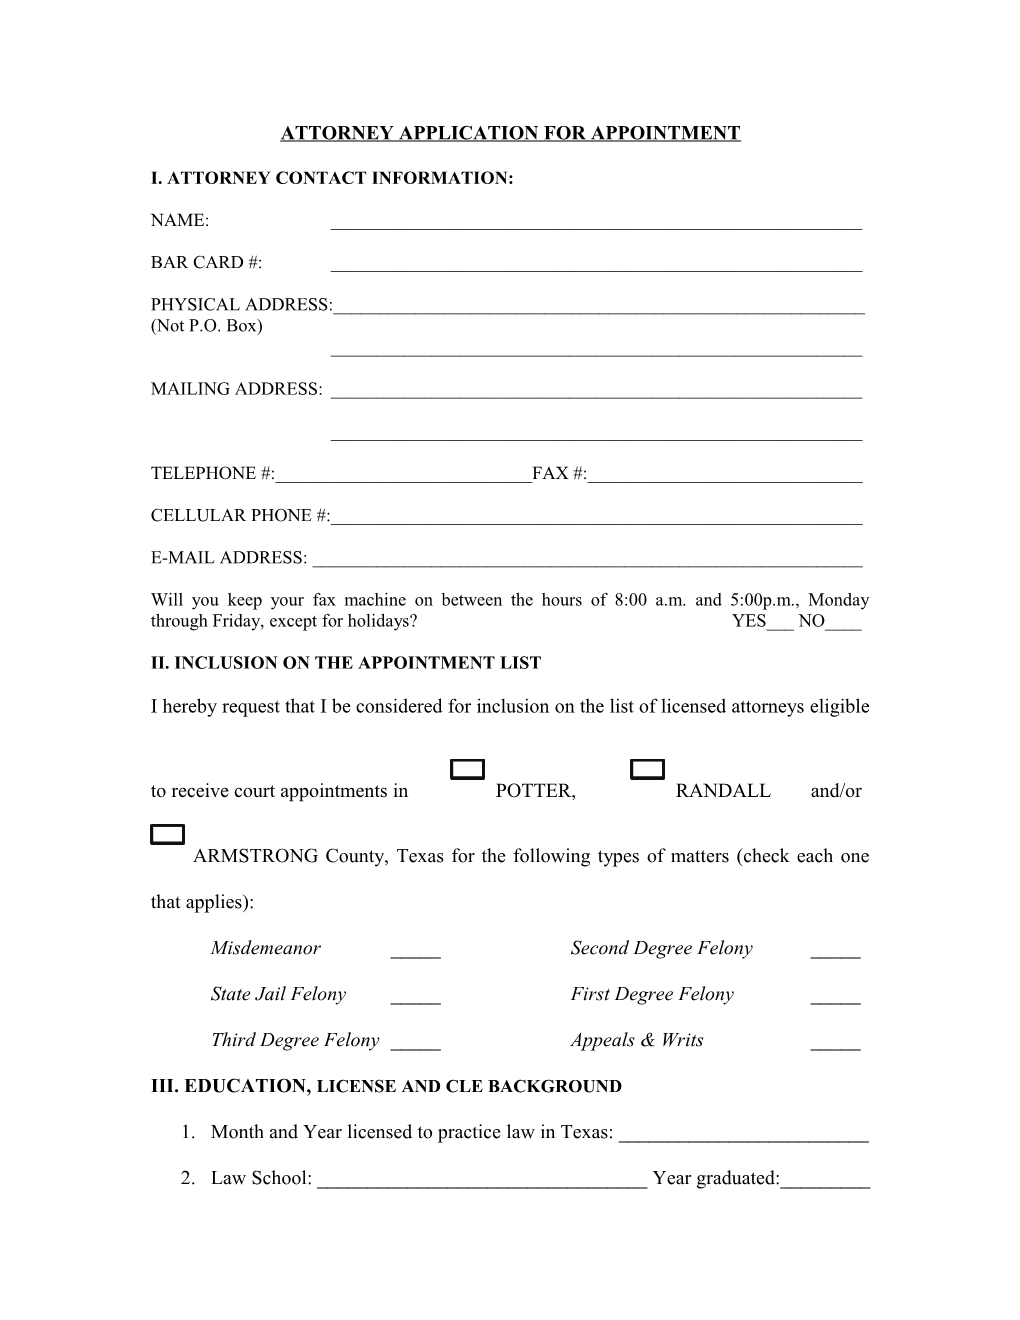 Attorney Application for Appointment